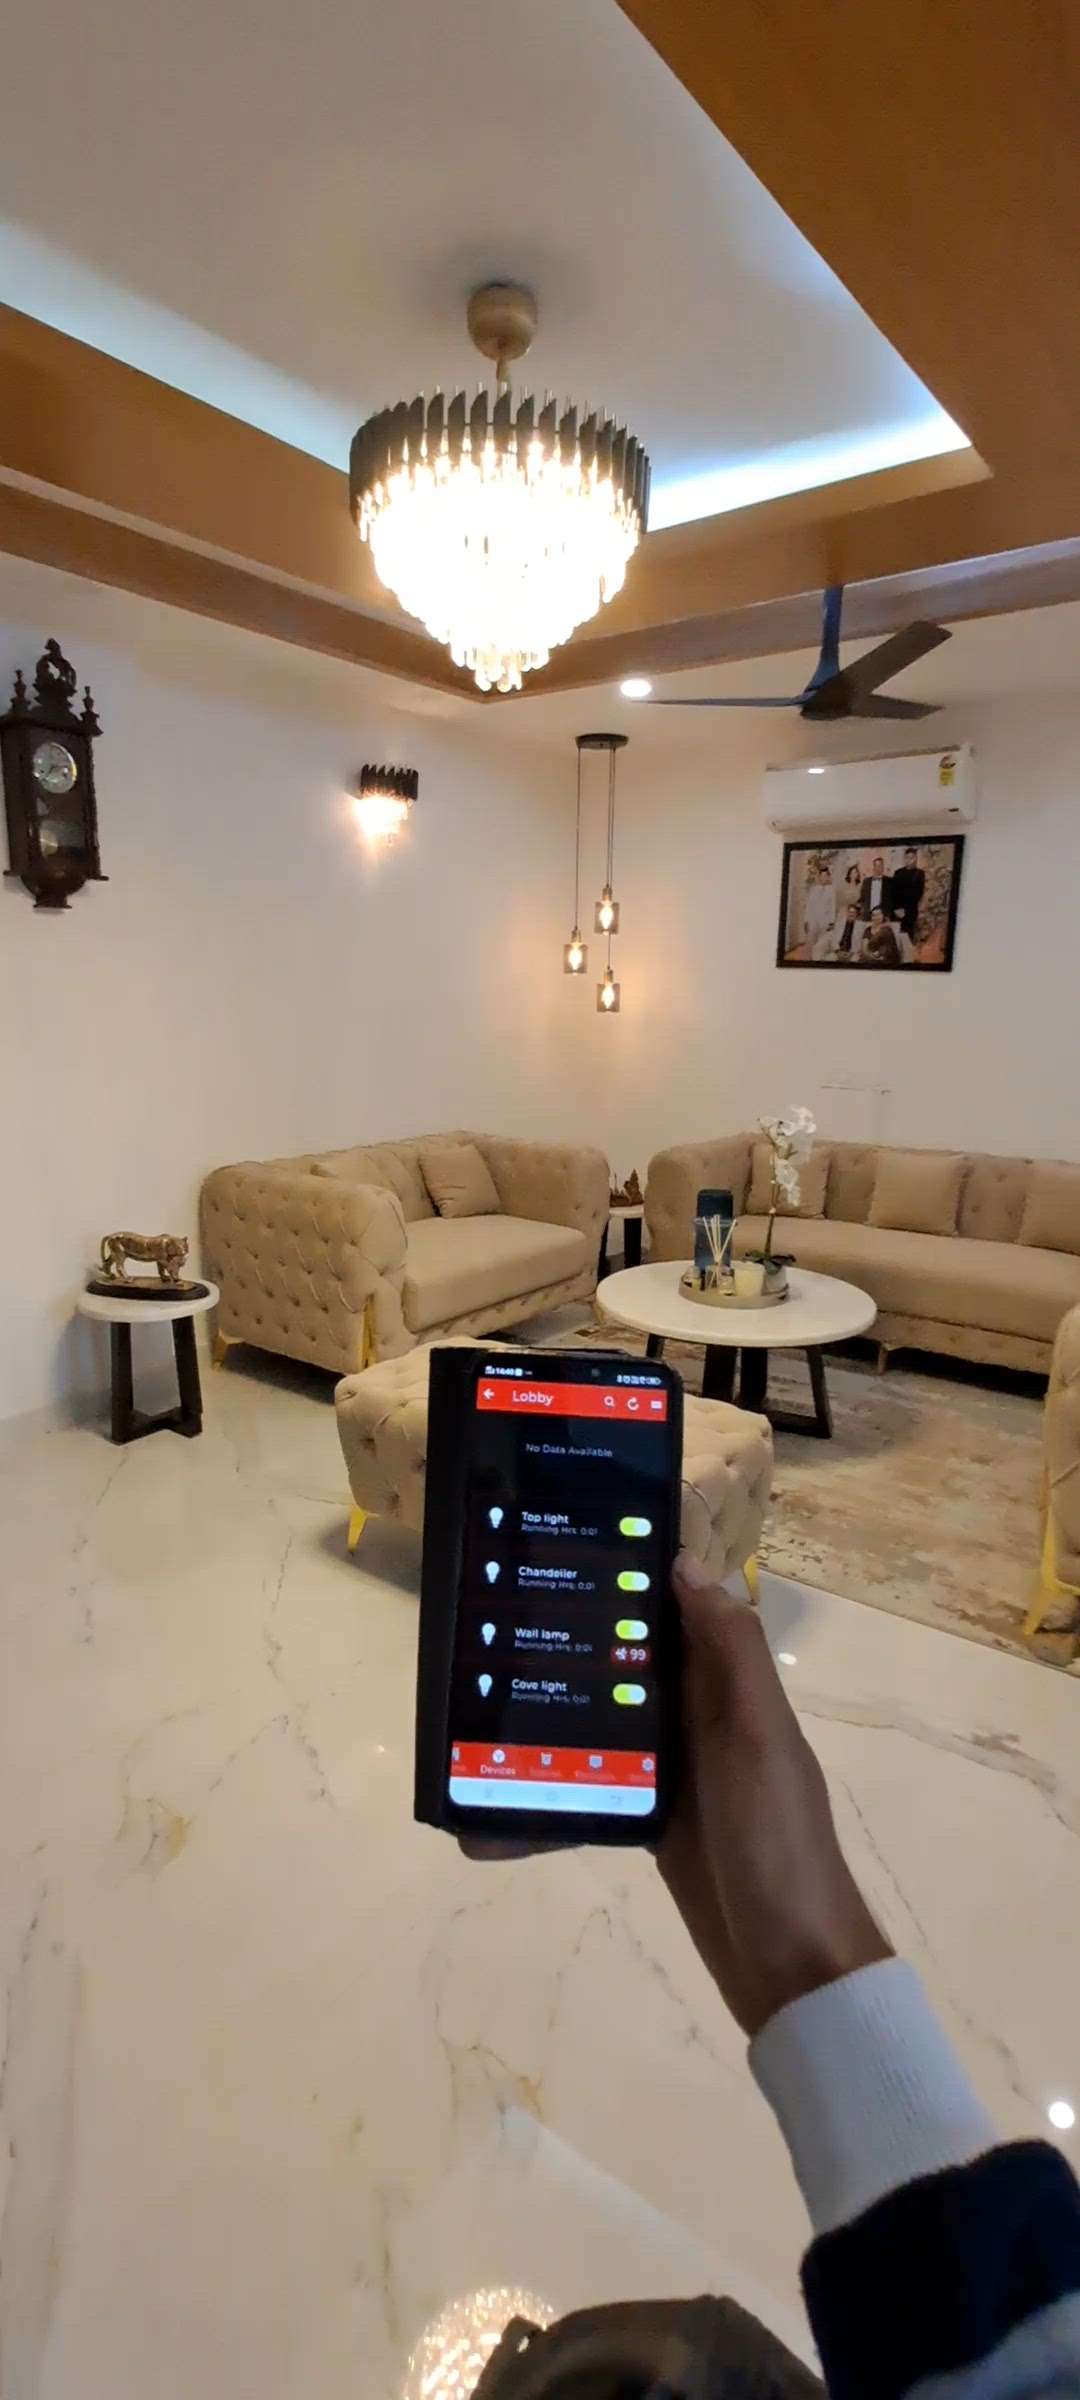 SMART BEDROOM 
Home automation